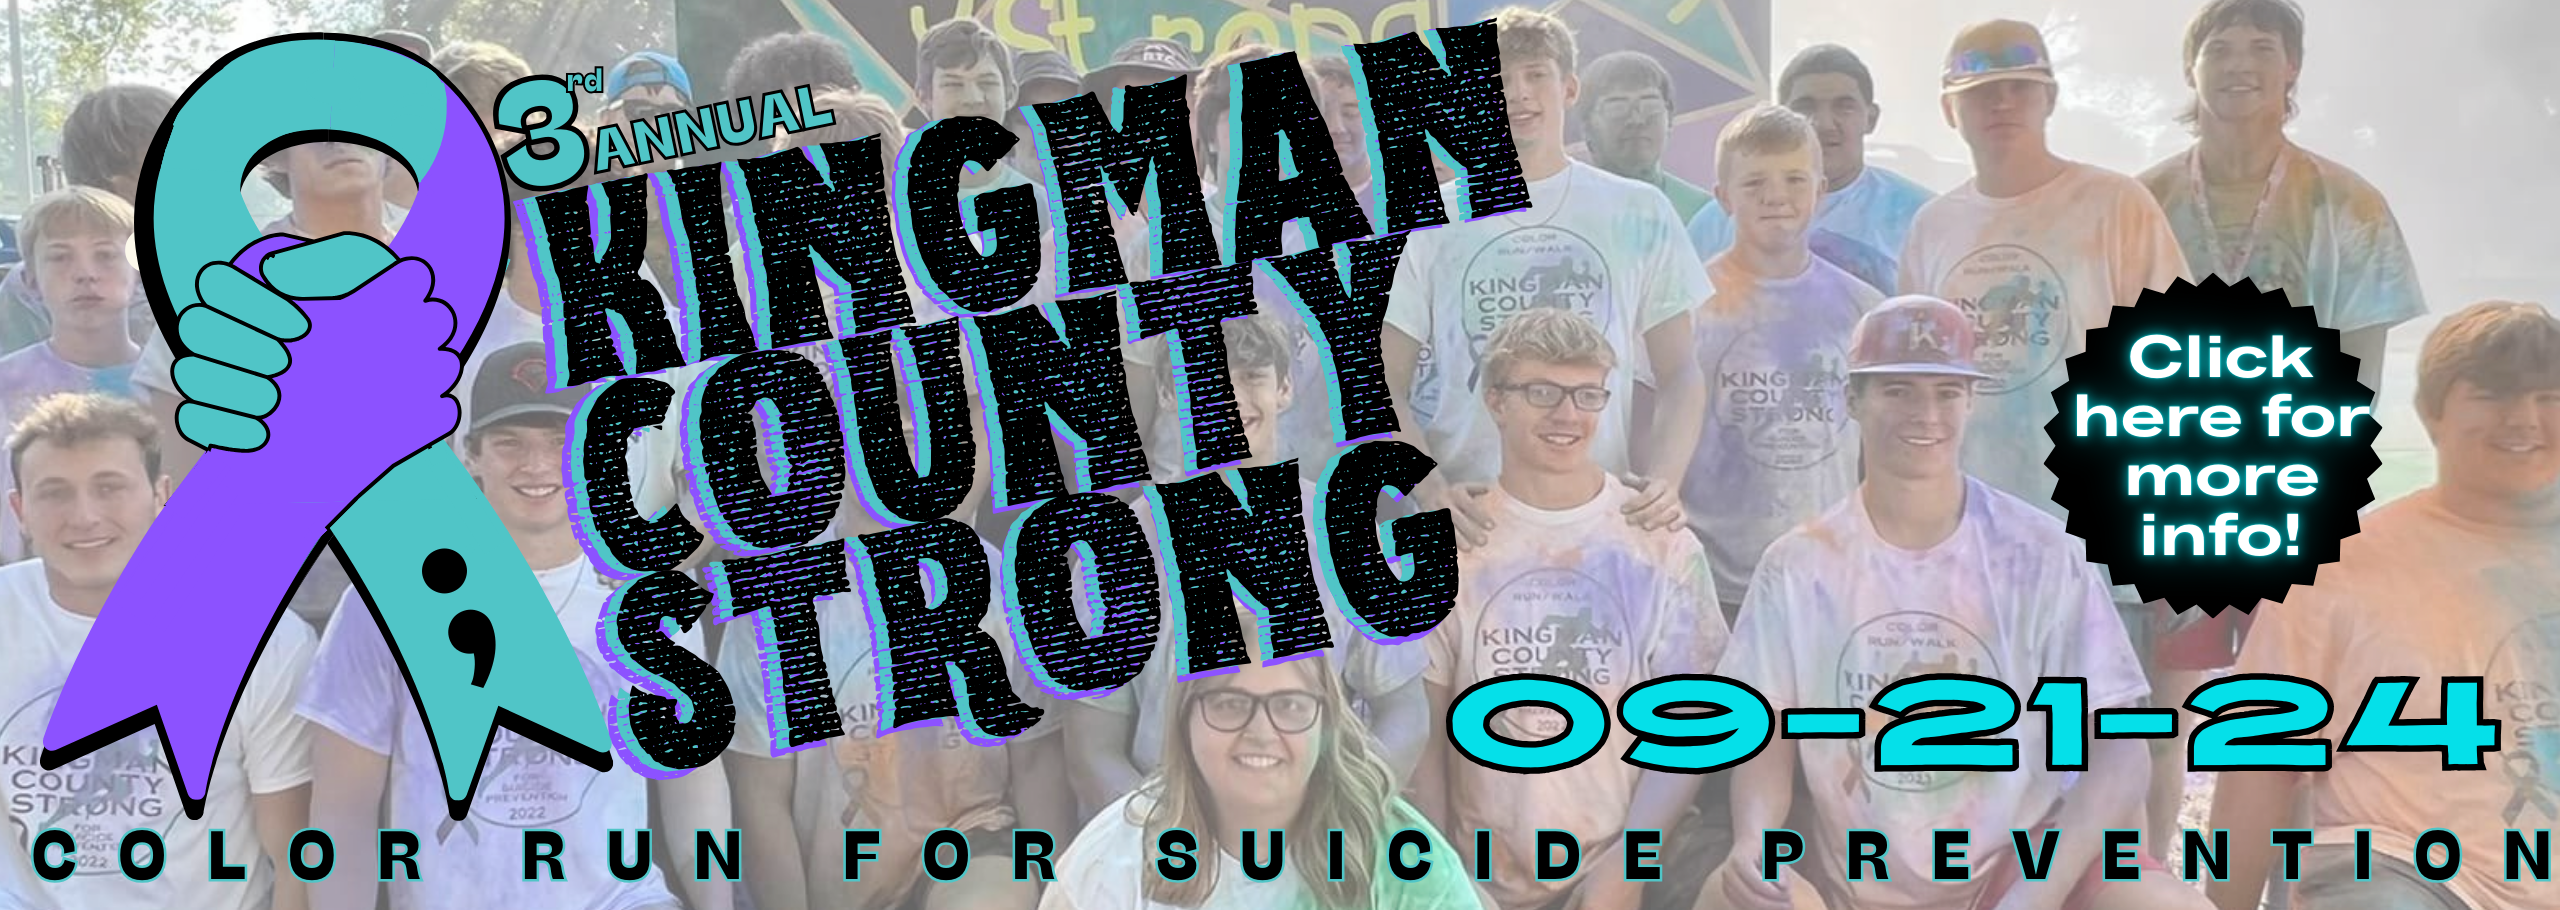 banner with runners for suicide awareness